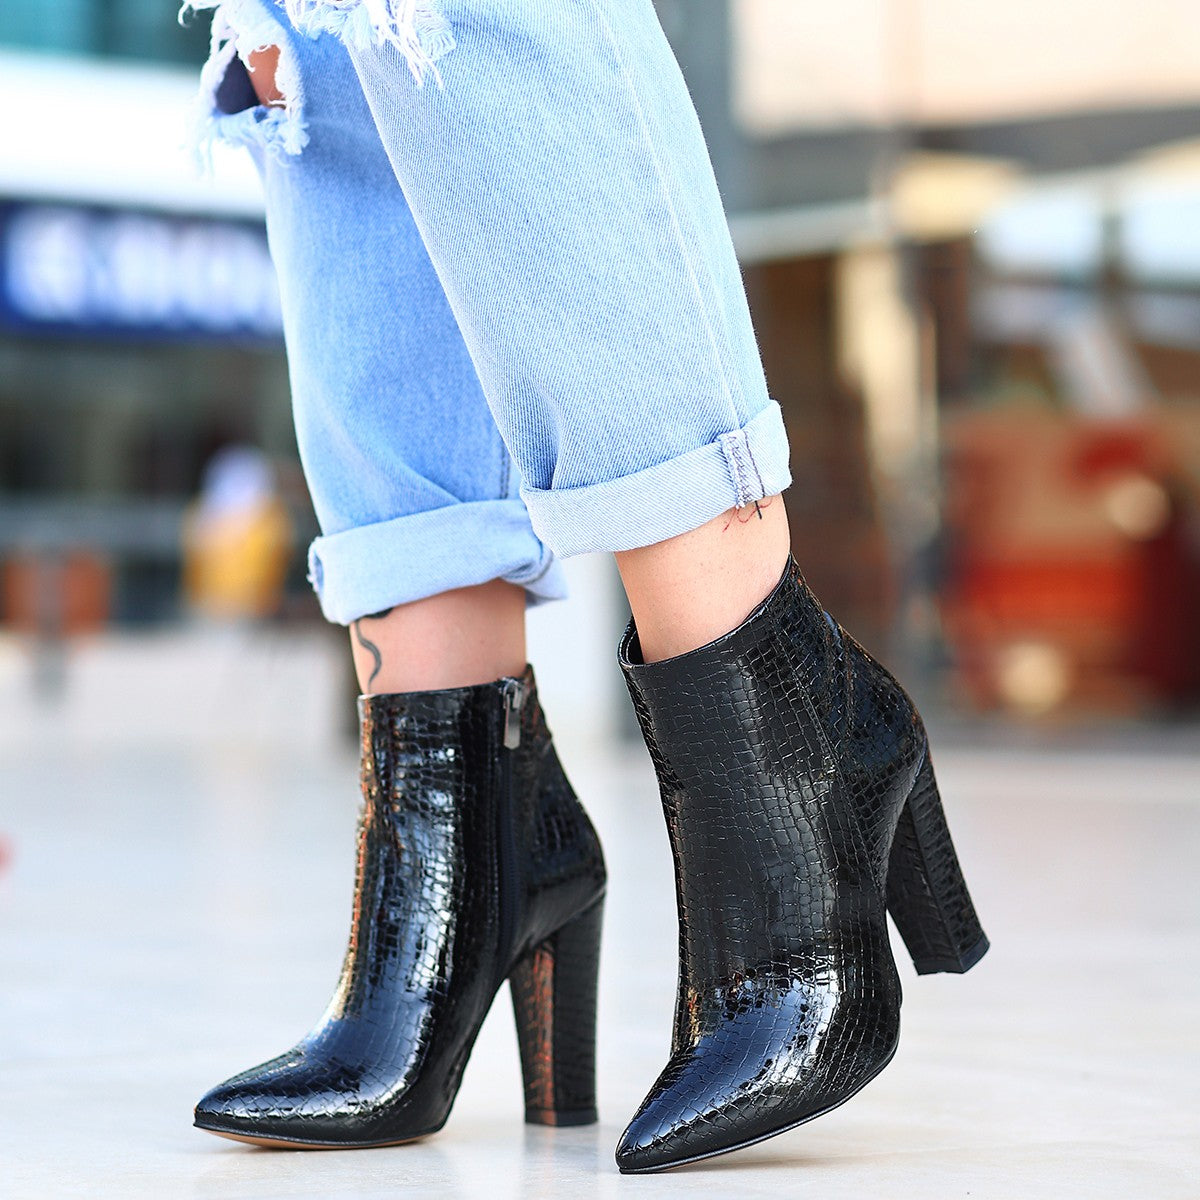 Women's Black Patent Leather Patterned Heeled Boots - STREETMODE ™